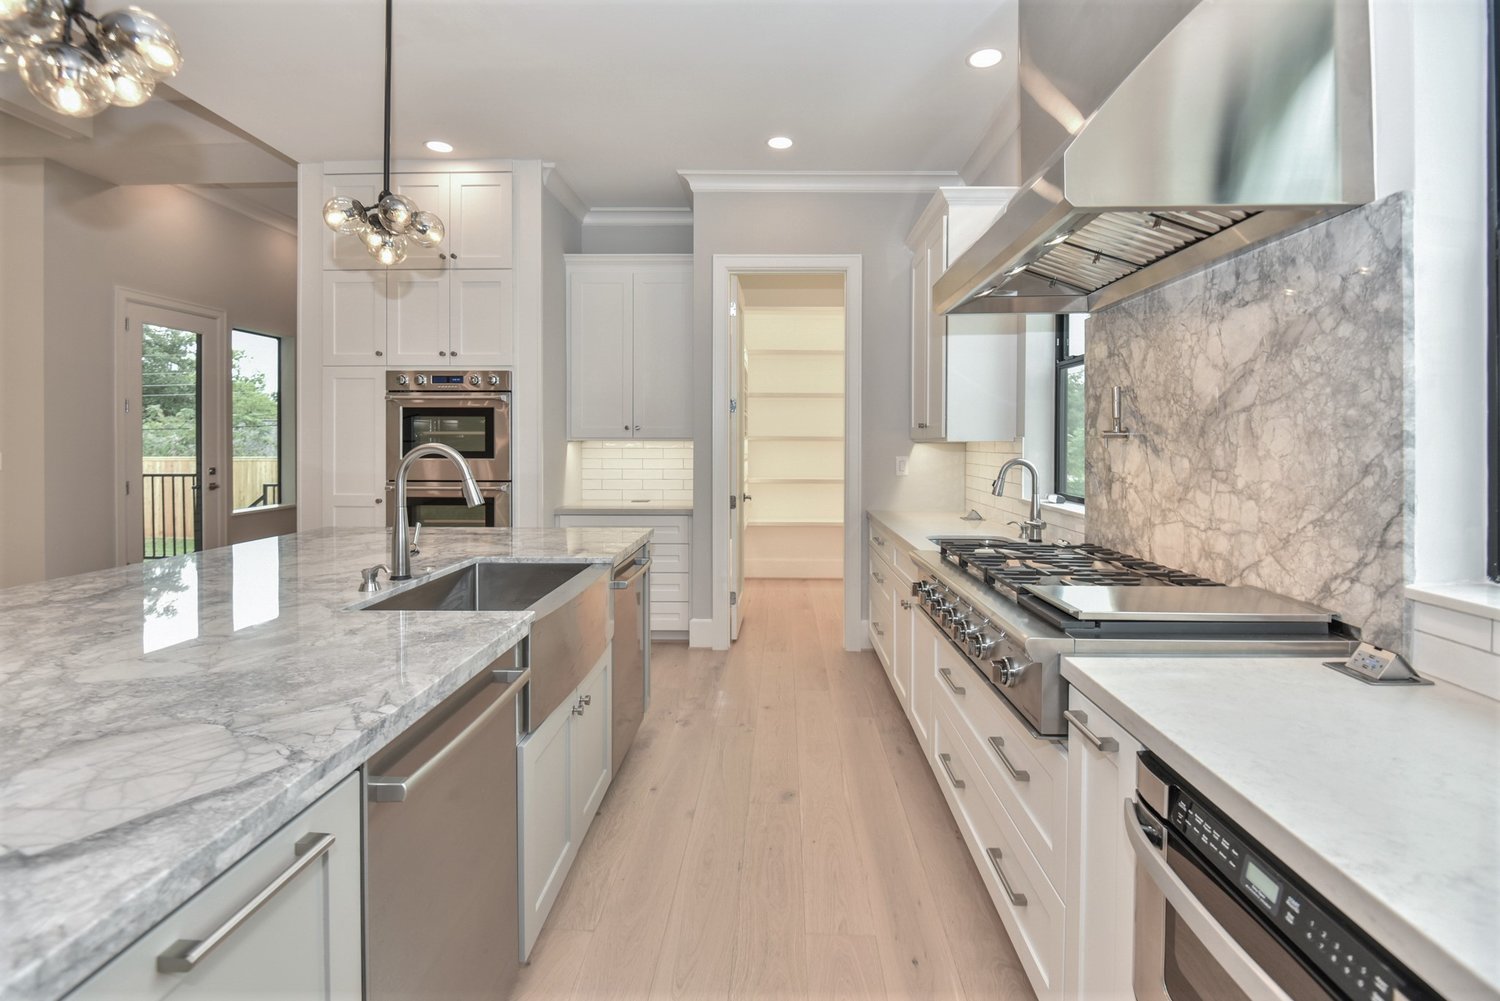 Designing Your Dream Kitchen Make Room For A Second Dishwasher Here S Why Arieli Custom Homes